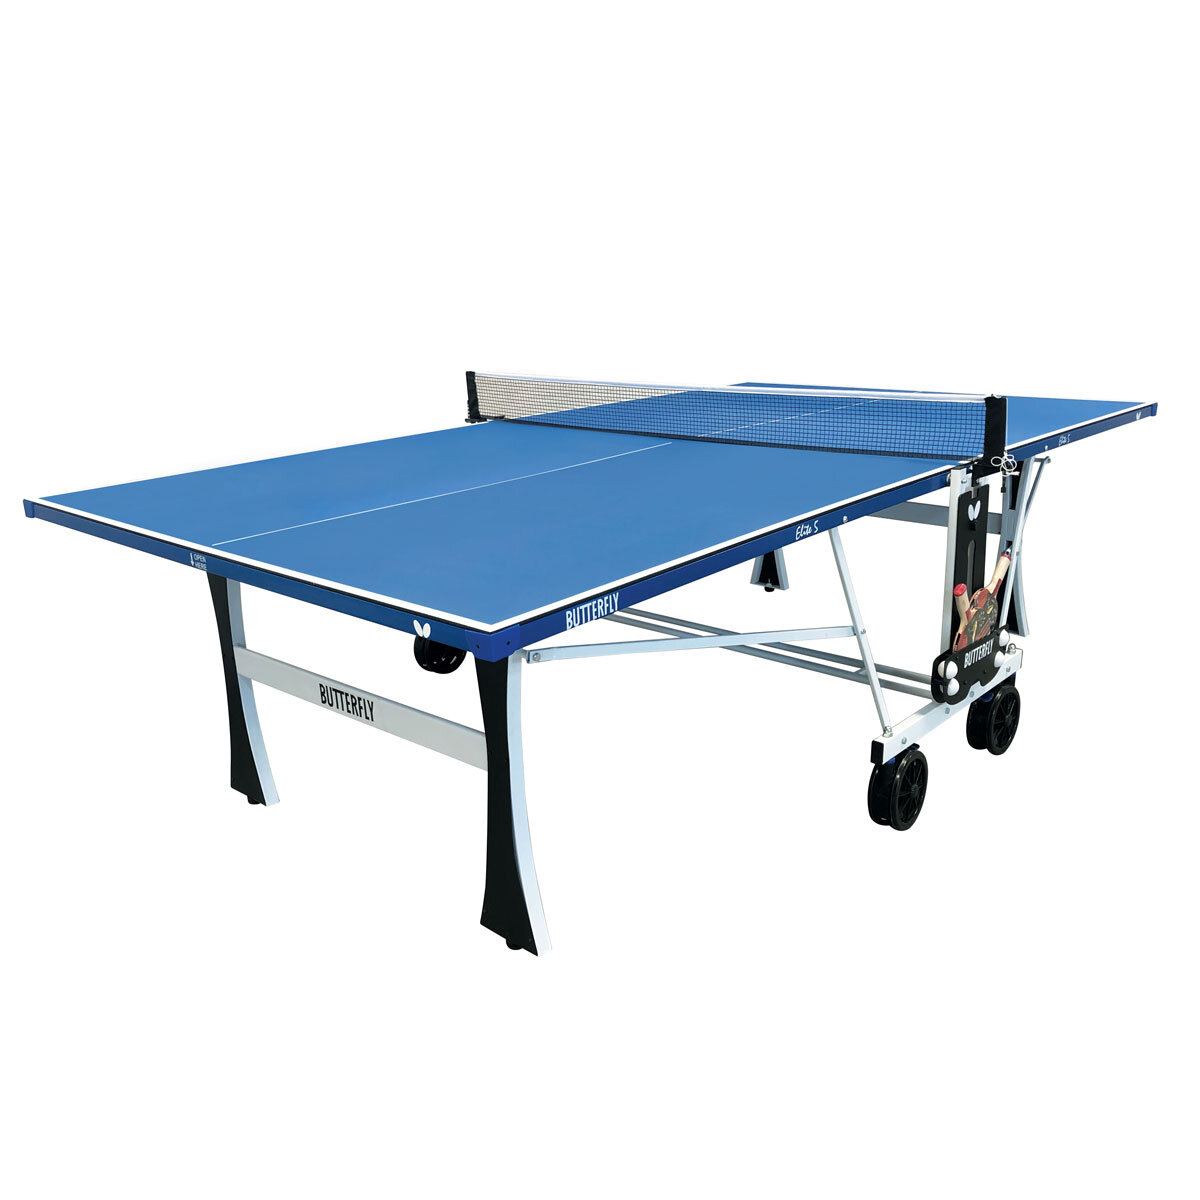 Butterfly Table Tennis Economy Clip Net And Post Set Ideal For Clubs And Schools 